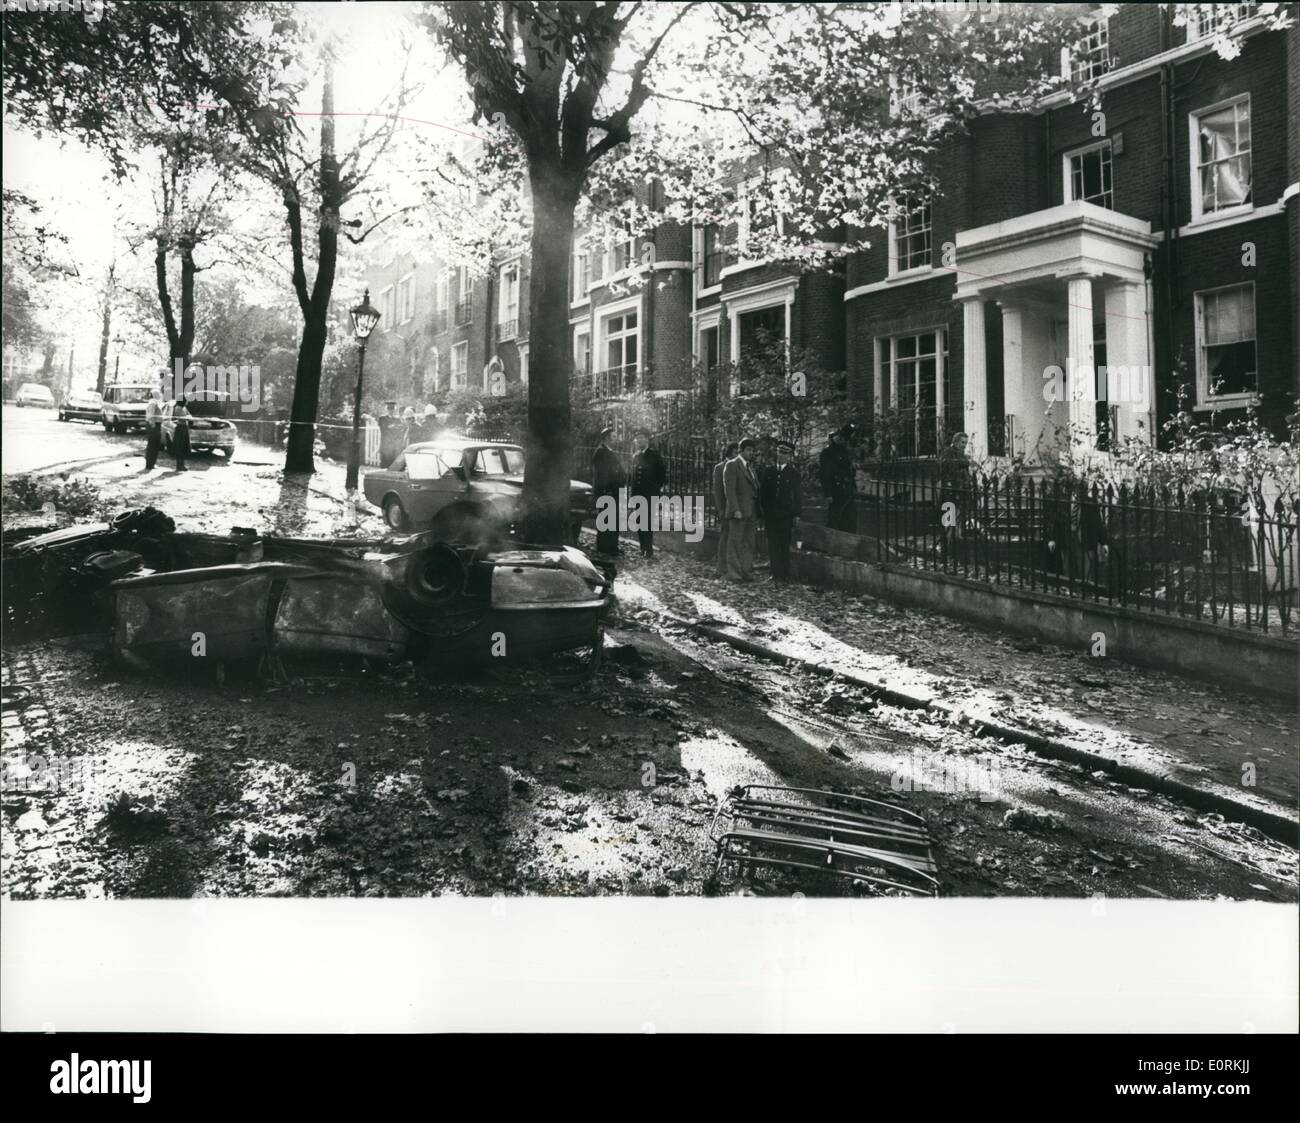 Jan 1, 1960 - Cardili Kennedy ''(Illegible)'' blast : Car ''(Illegible)'' year old daughter of the late President Kennedy and Tory MP Mr Hugh Fraser, her host in London, caped hill sqauane. Kesington one person who killd he he past my and seven people were trger for shock. Mr. Fraer who about to drive Miss Eedy to Stheby a where she w doing as fi arts hoirse what saved their lives who a phon call the hegh Fraser made to enther M Moments later his daughter was between onto its rof Stock Photo